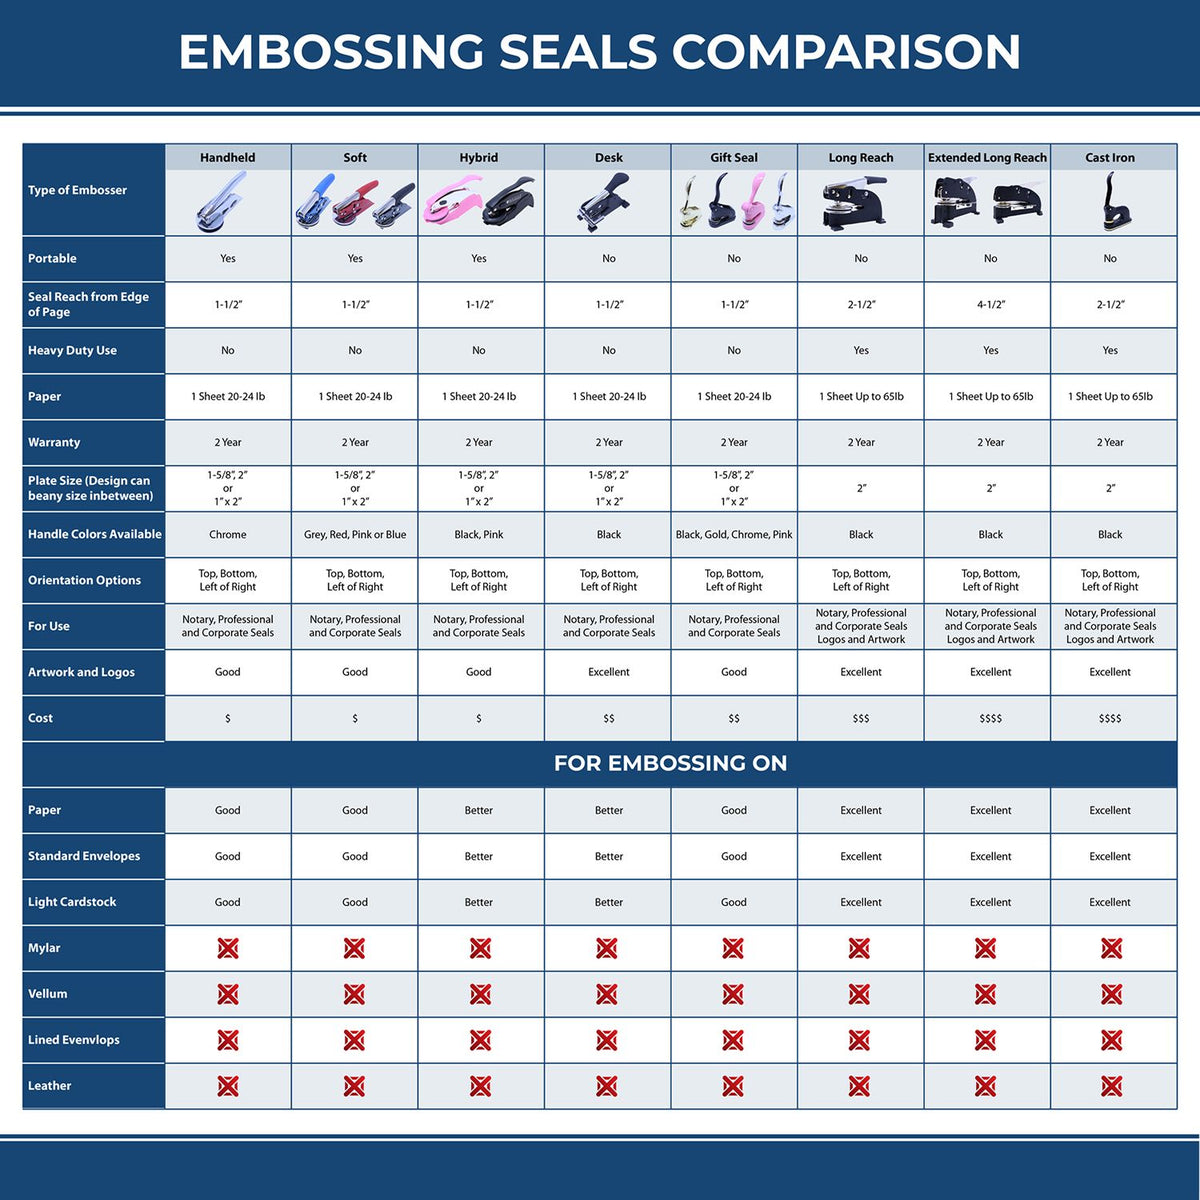 A comparison chart for the different types of mount models available for the State of Colorado Soft Land Surveyor Embossing Seal.